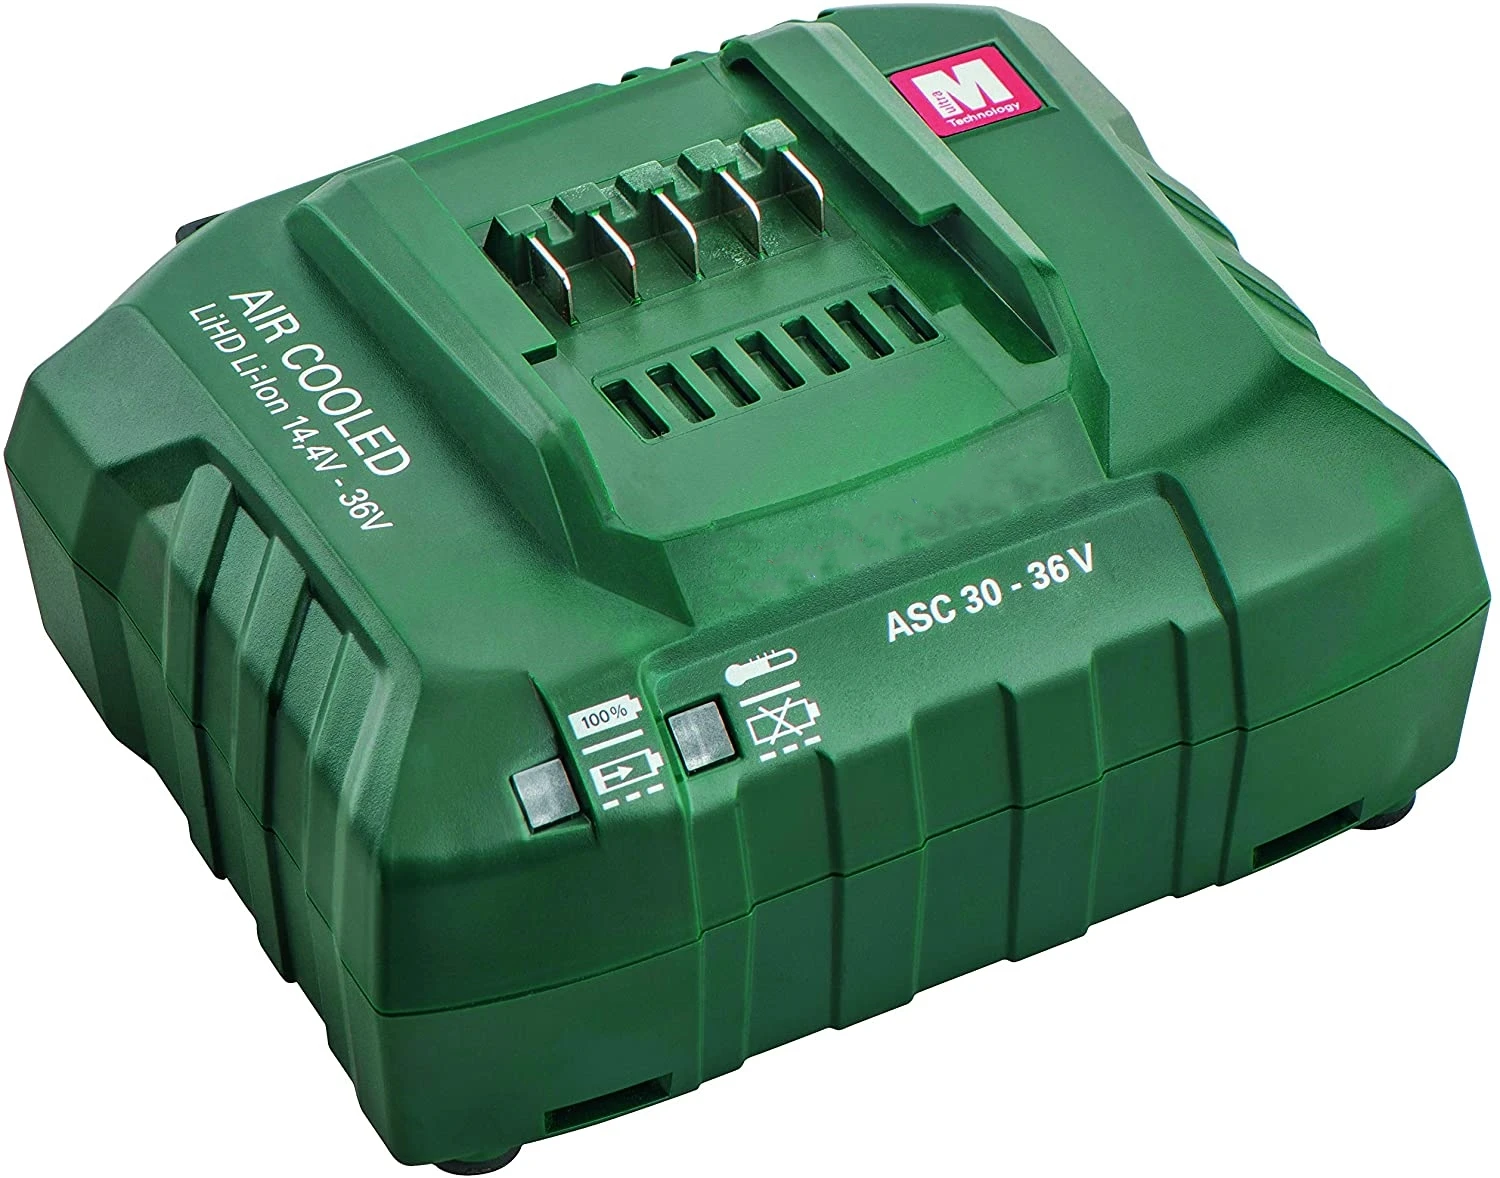 14.4V-36V Air Cooled For Metabo Replacement Power Tools Lithium ion Battery Rechargeable Charger MPTASC30P